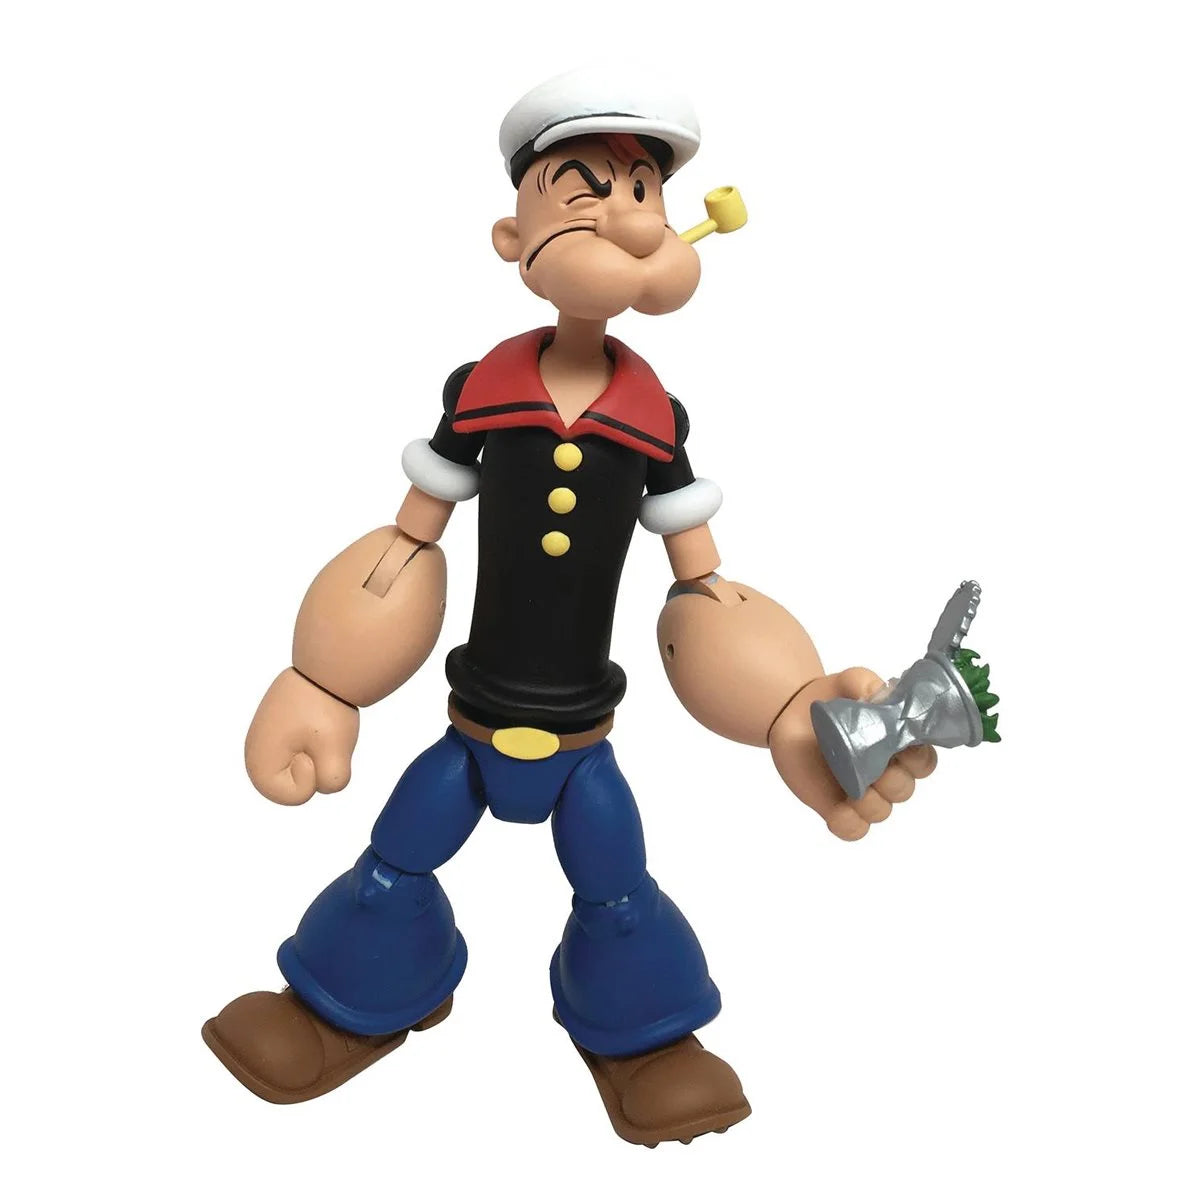 Popeye White Sailor Suit 1:12 Scale Action Figure by Boss Fight Studio